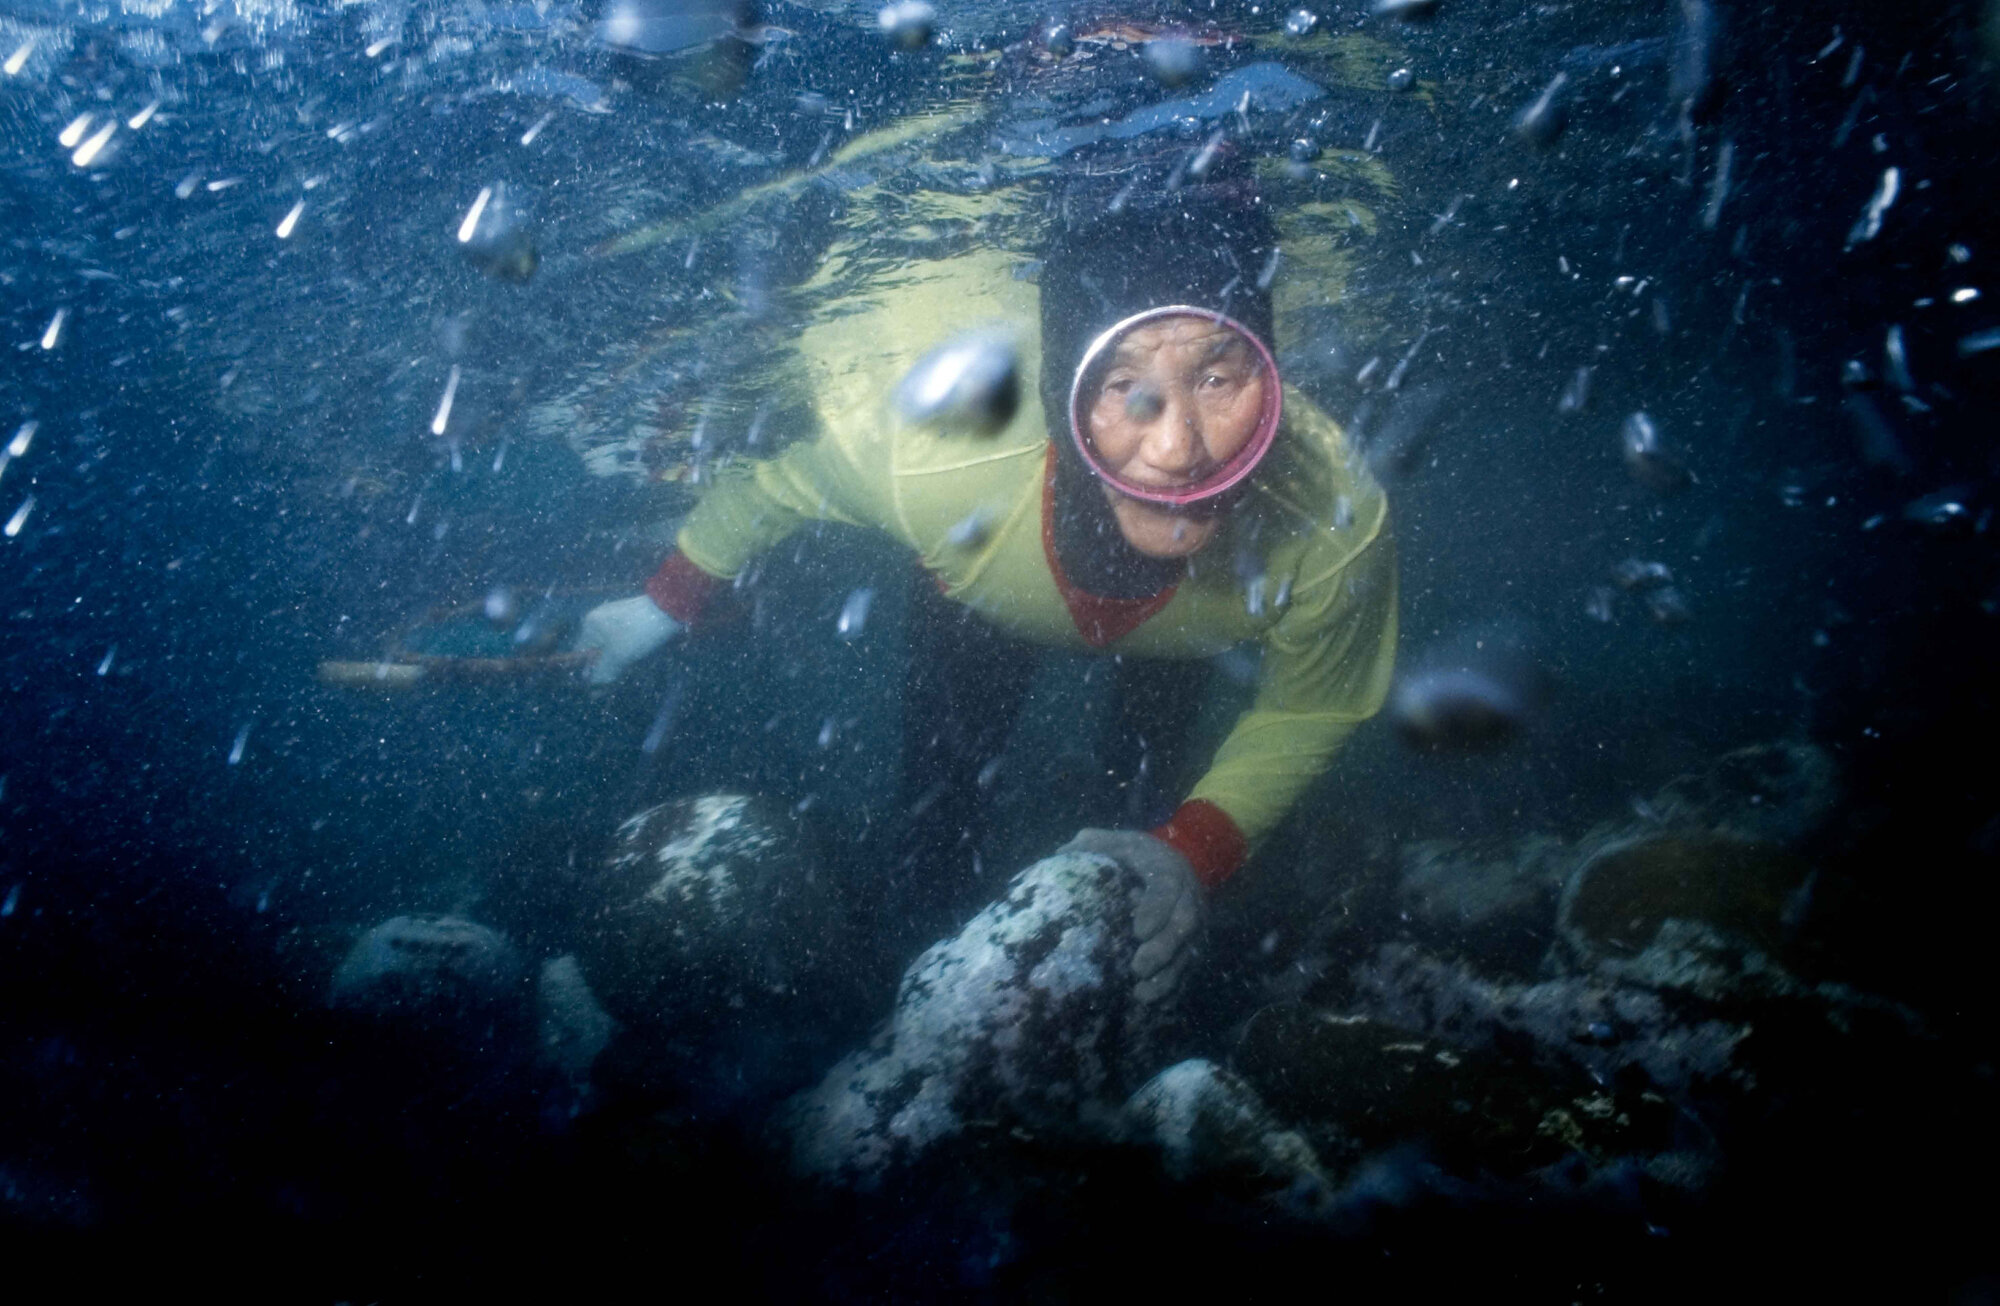  An 89 year old Haenyo (sea woman) holds her breath and searches for marine snails in Jeju, Korea. Photo: David White, 14 February 2005 